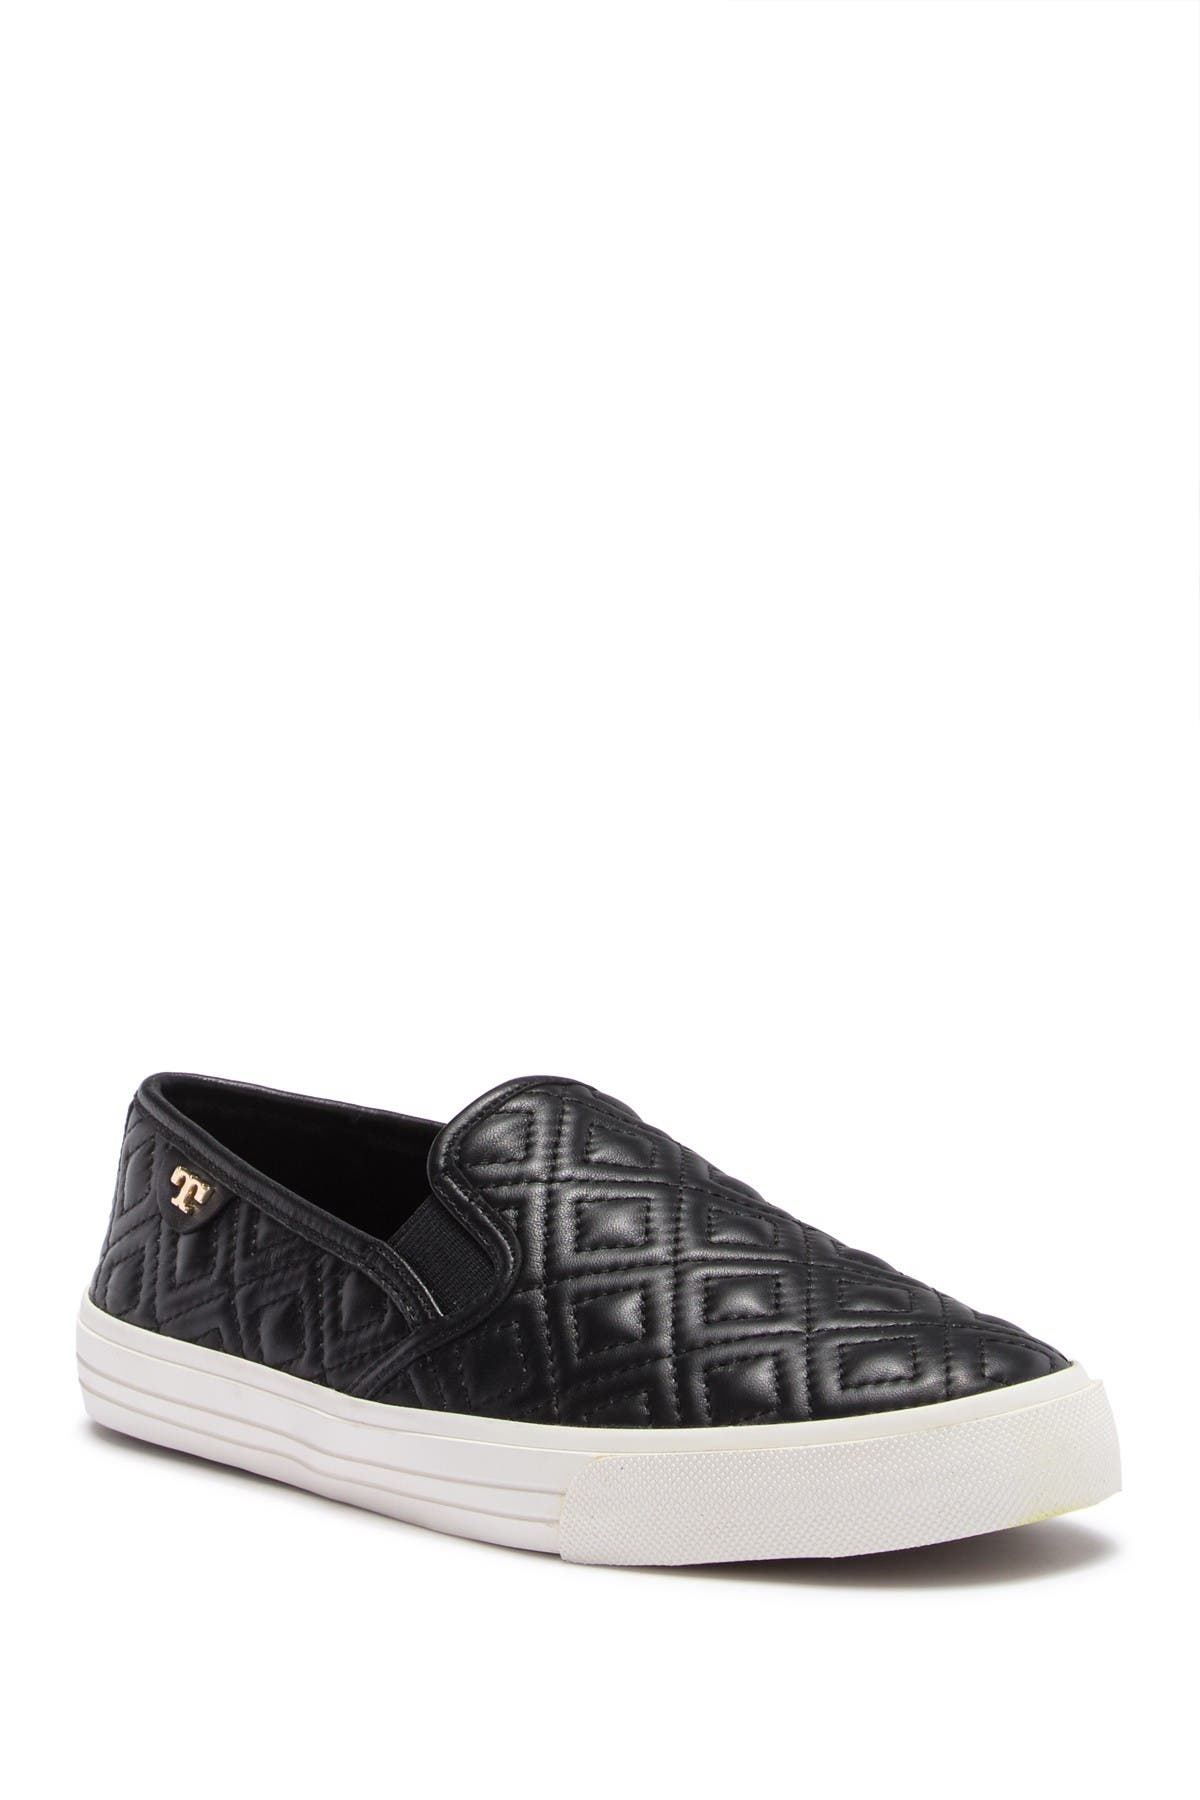 jesse quilted sneaker tory burch